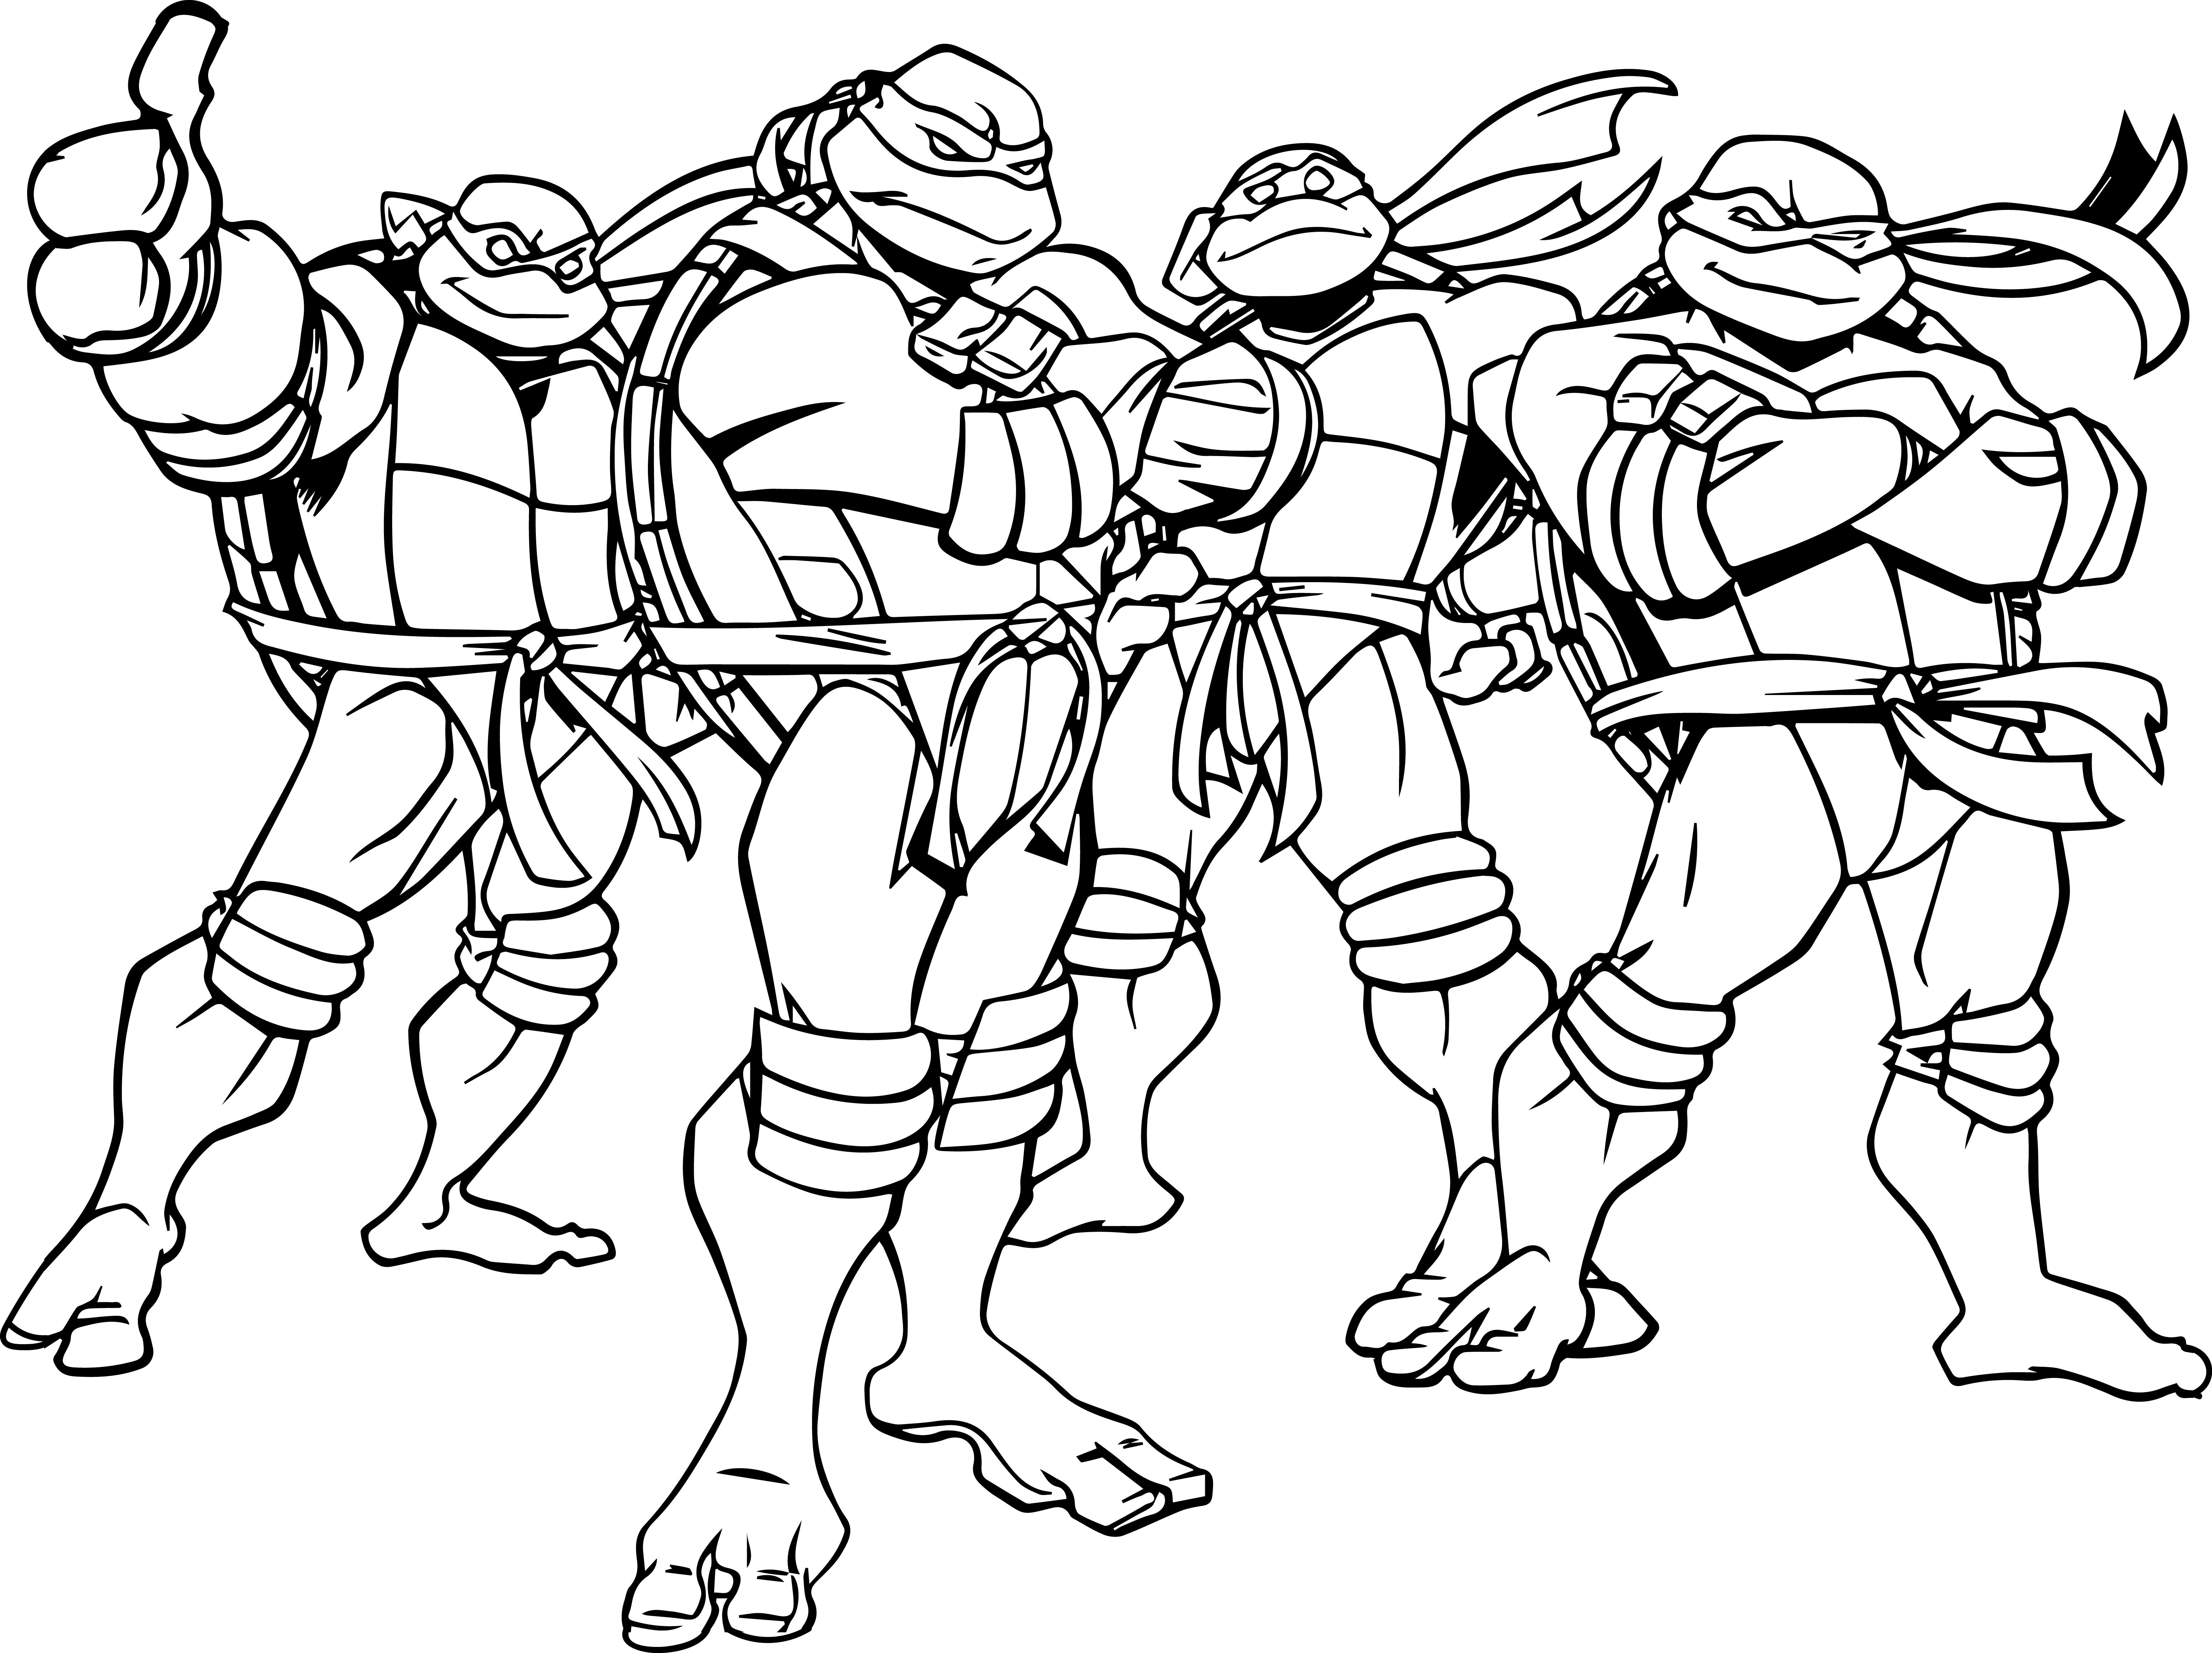 ninja-turtle-coloring-pages-pdf-at-getcolorings-free-printable-colorings-pages-to-print